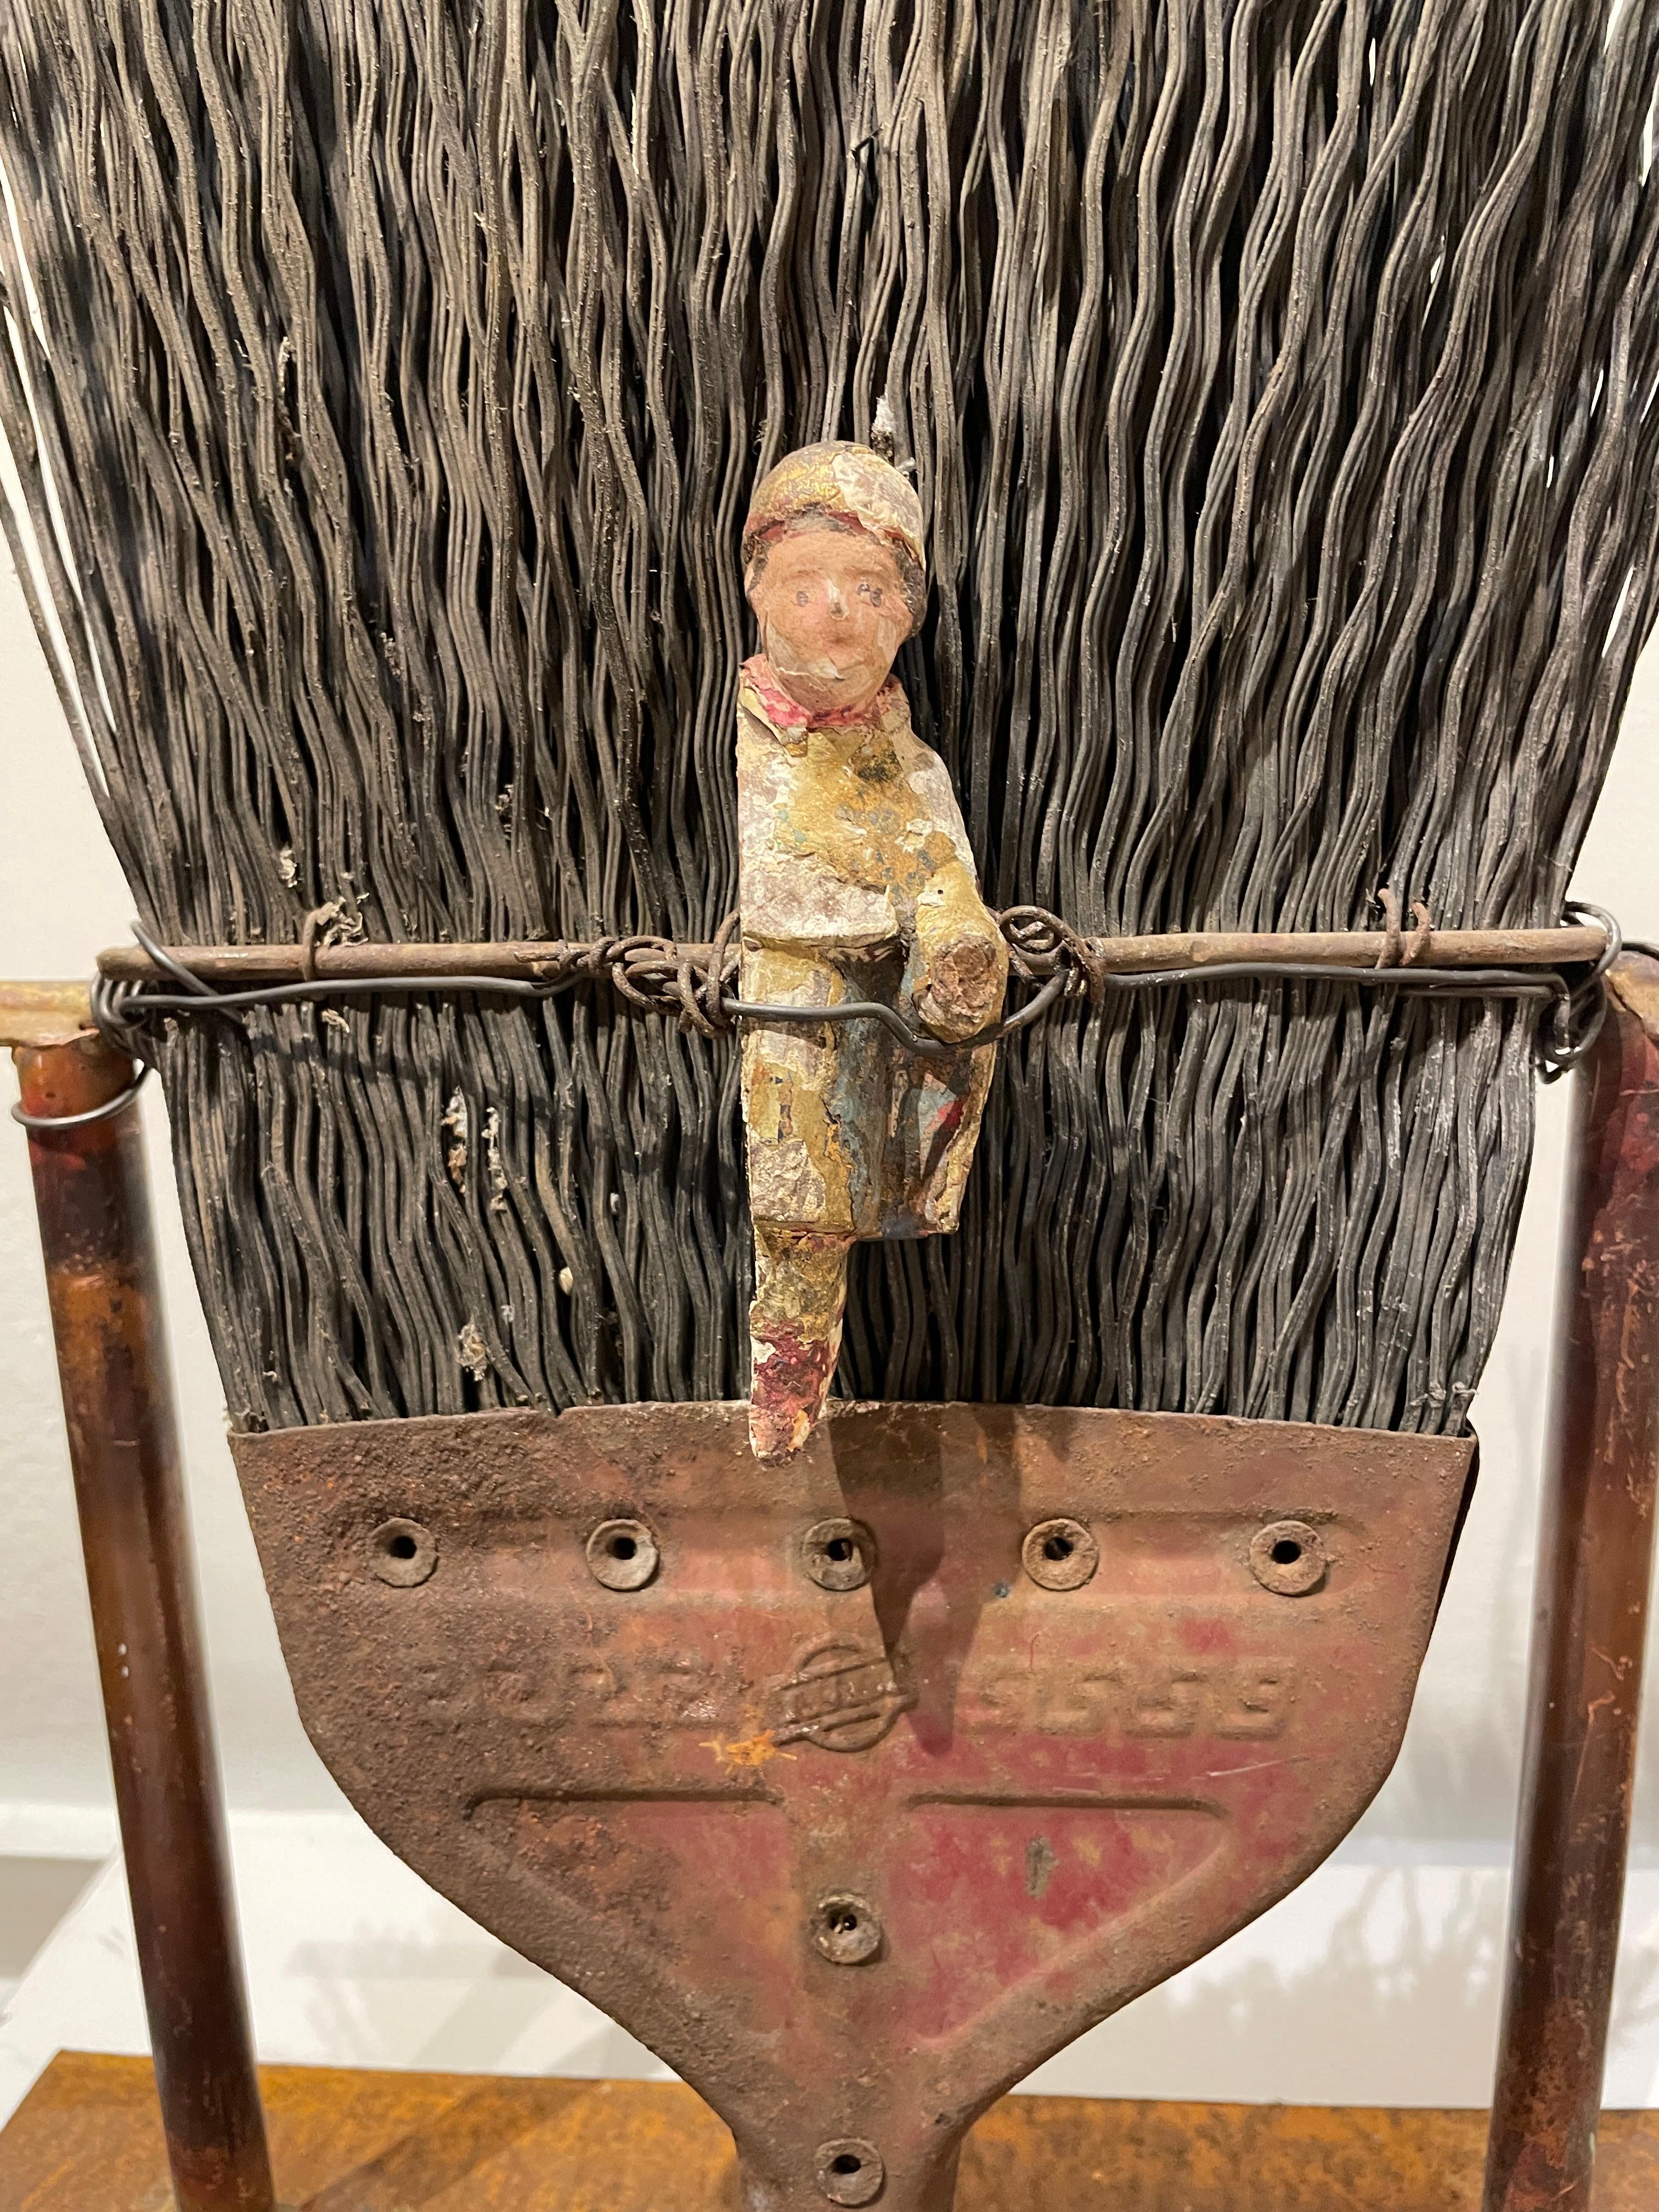 Order of the Ages - Found Object Sculpture with Heavy Bristle Brush & Figure For Sale 1